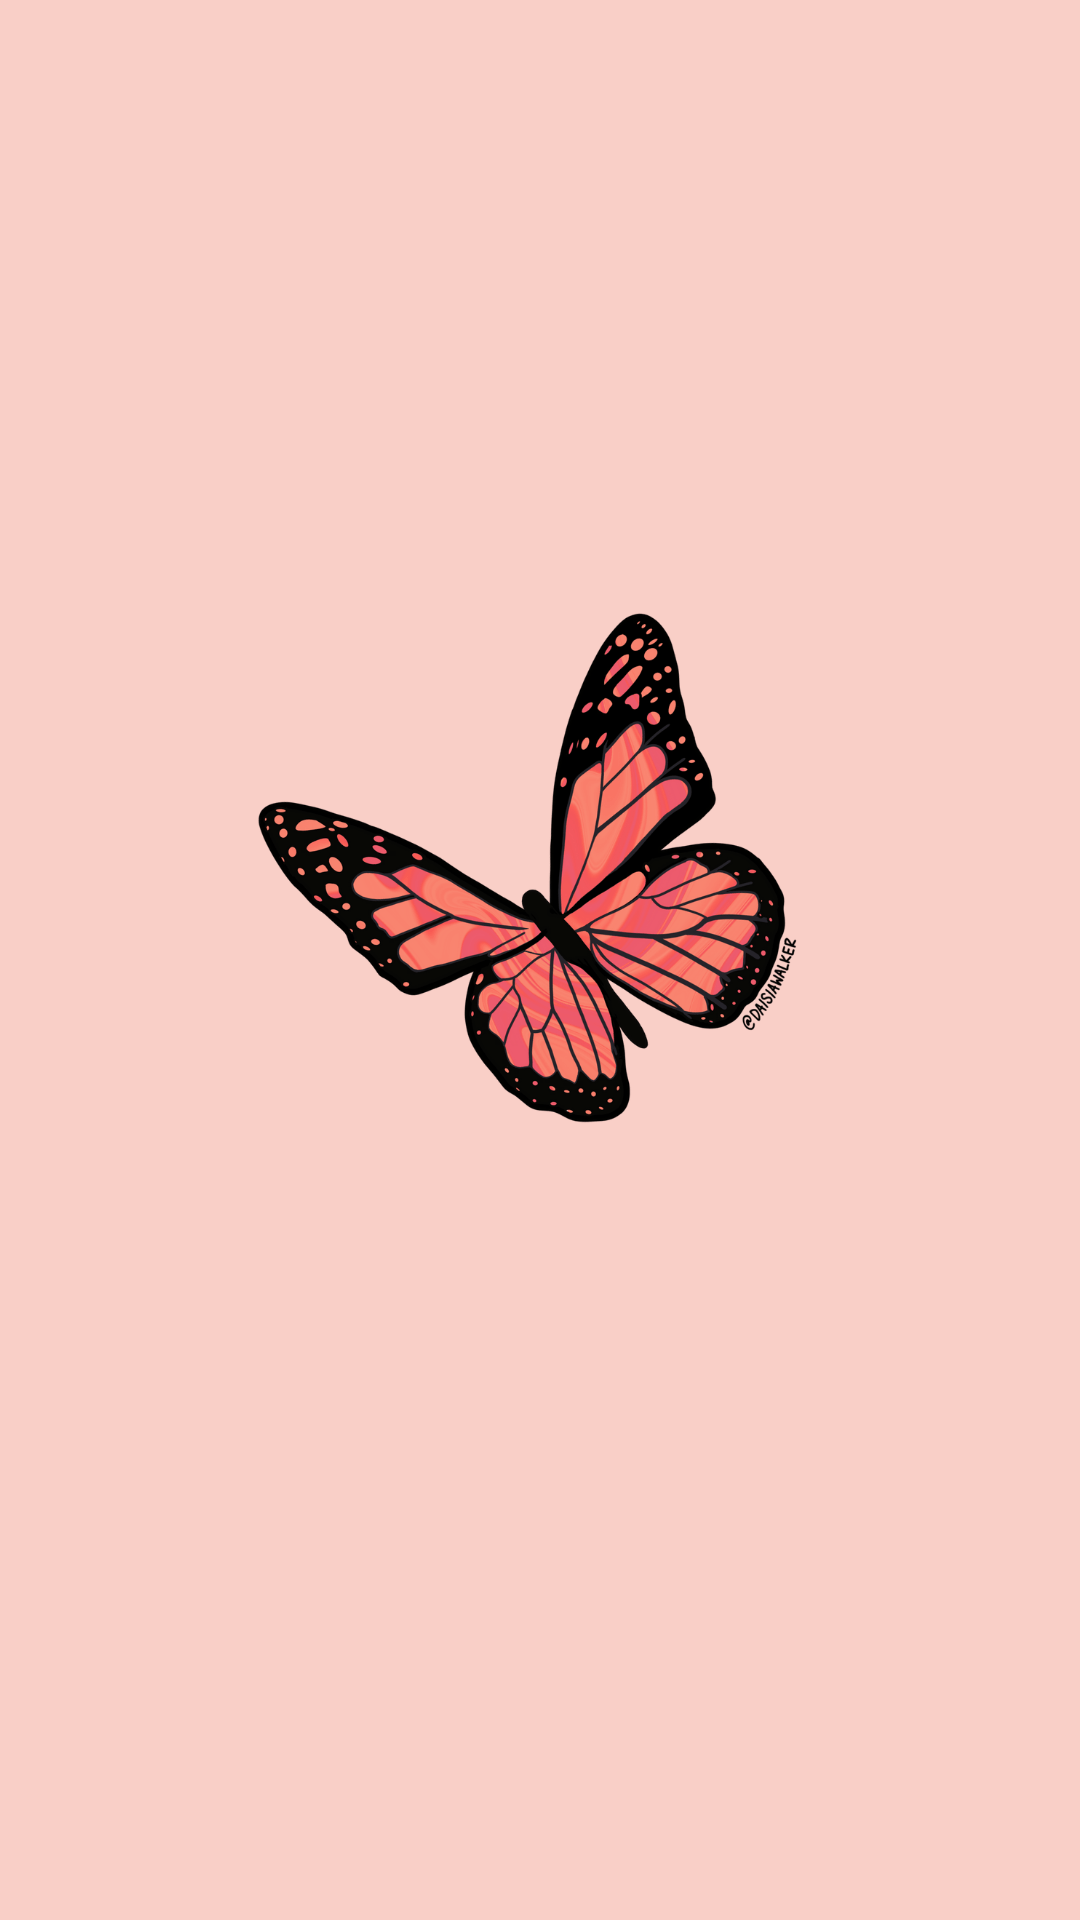 Aesthetic butterfly wallpaper for phone background. - Butterfly